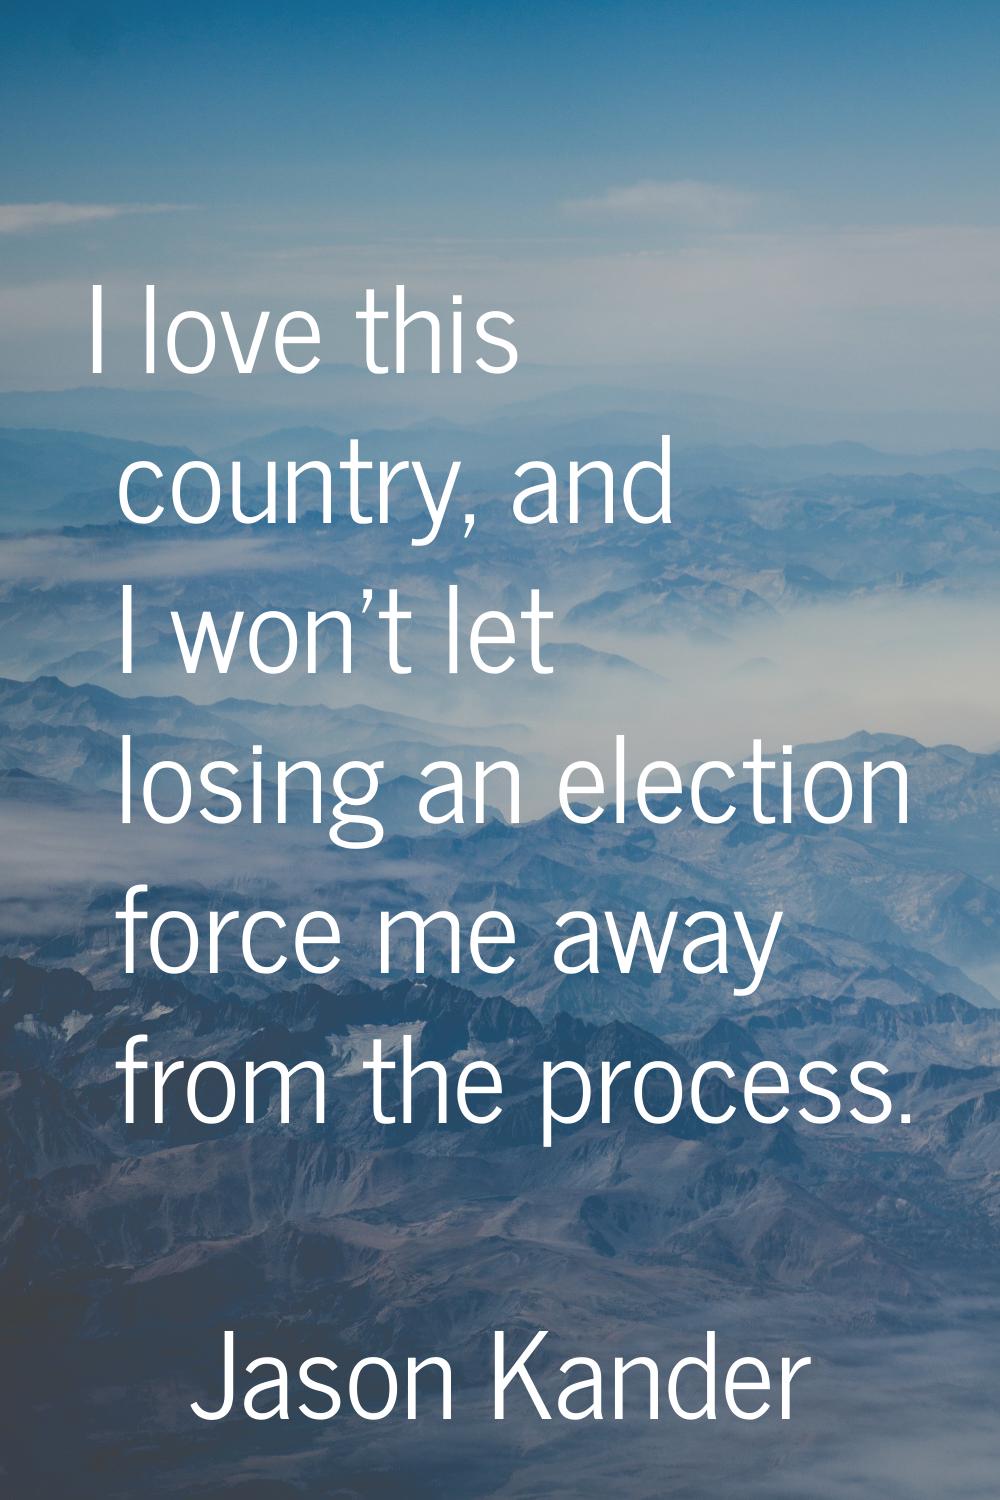 I love this country, and I won't let losing an election force me away from the process.